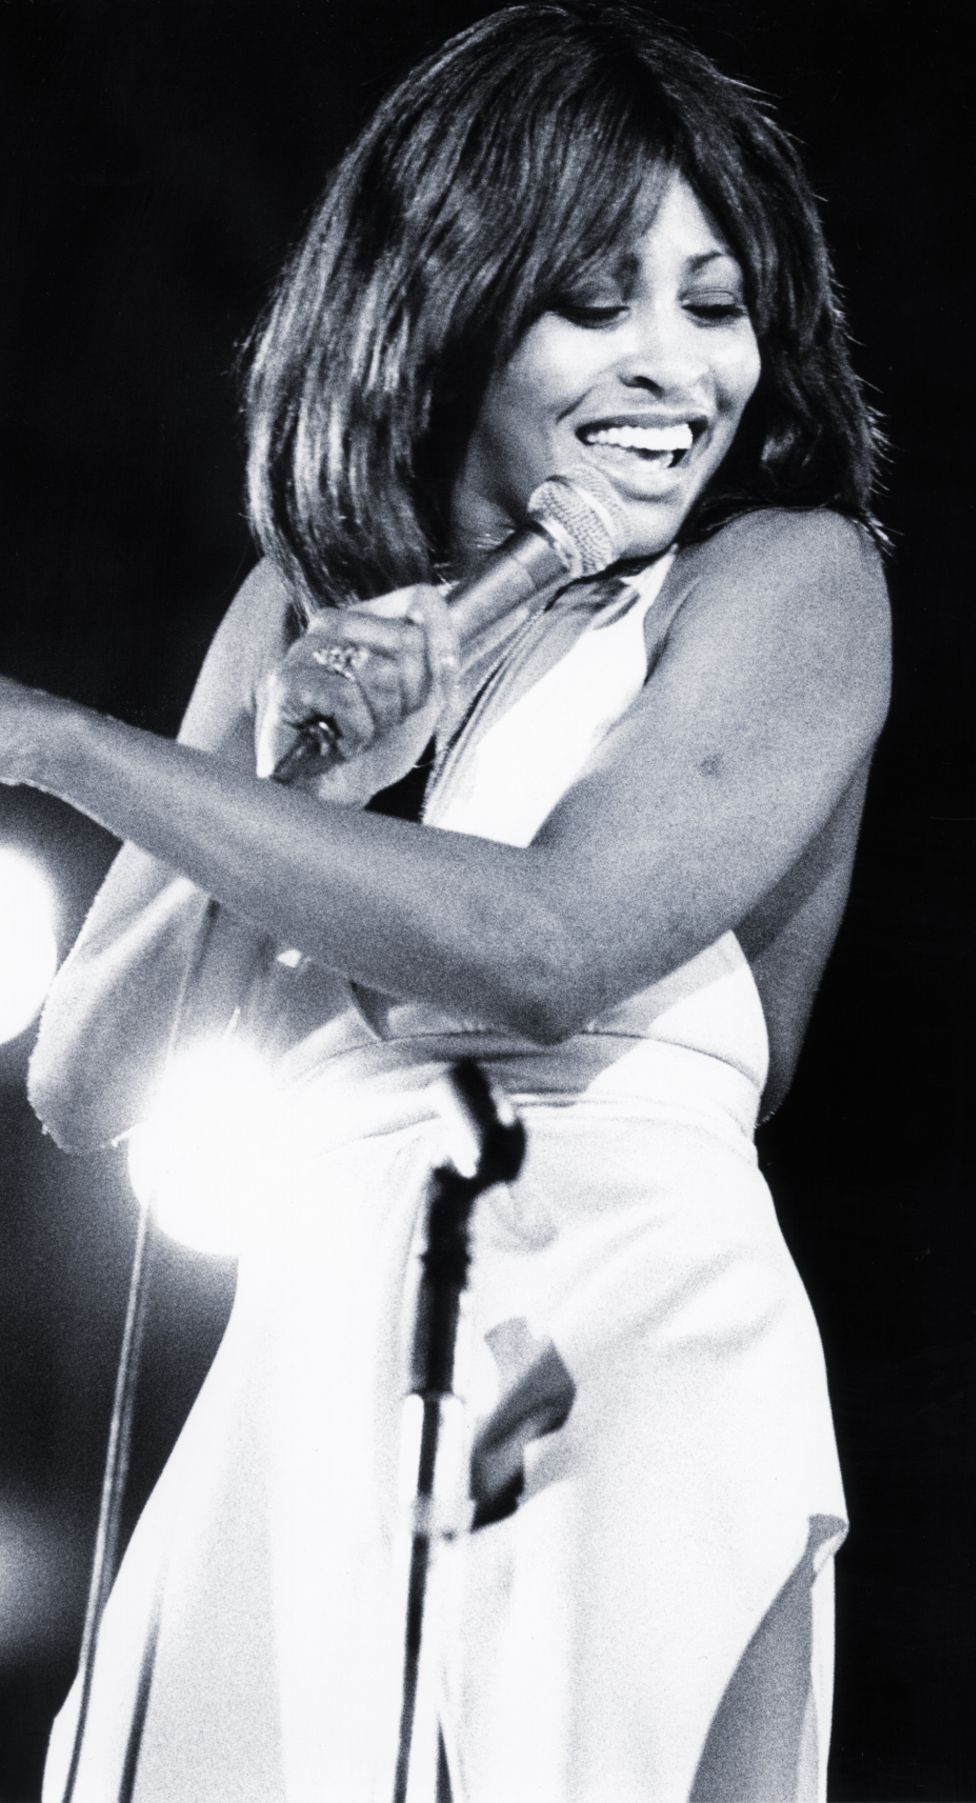 Turner on stage in 1975